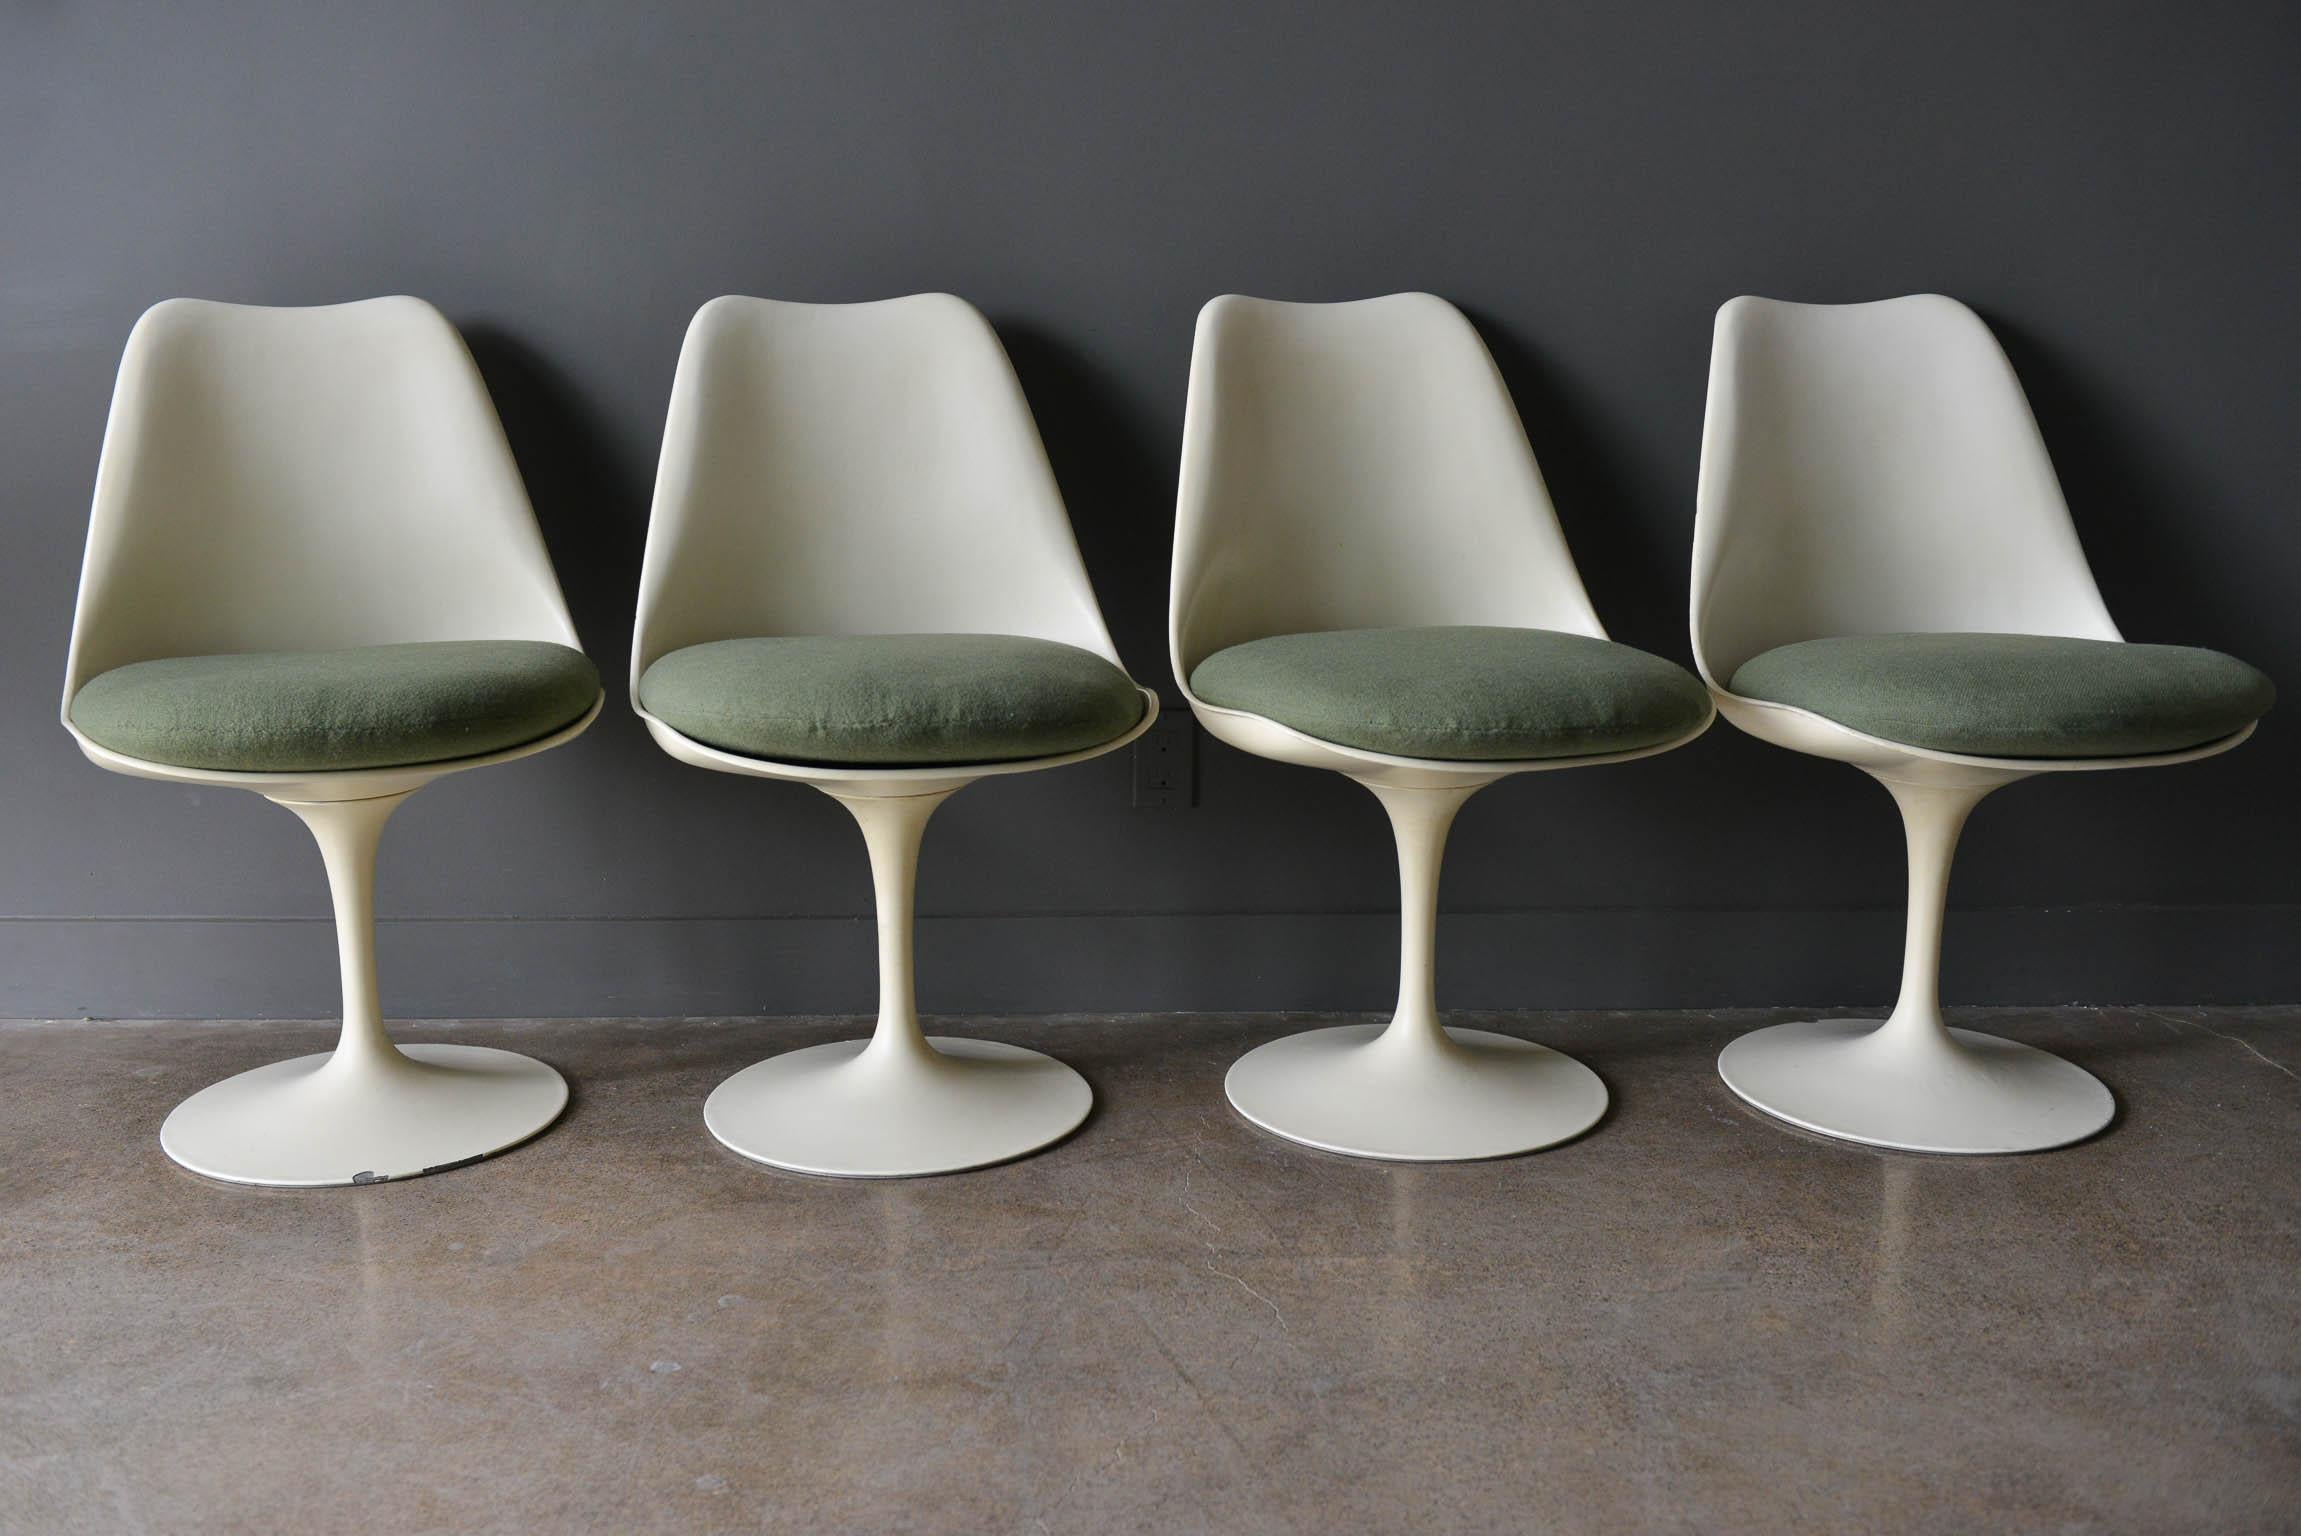 Set of six early production Tulip dining chairs by Eero Saarinen for Knoll, circa 1960, with early Knoll bowtie labels, 320 Park Ave. NYC. Set includes two armchairs and four armless dining chairs. Wool upholstery in excellent condition with new